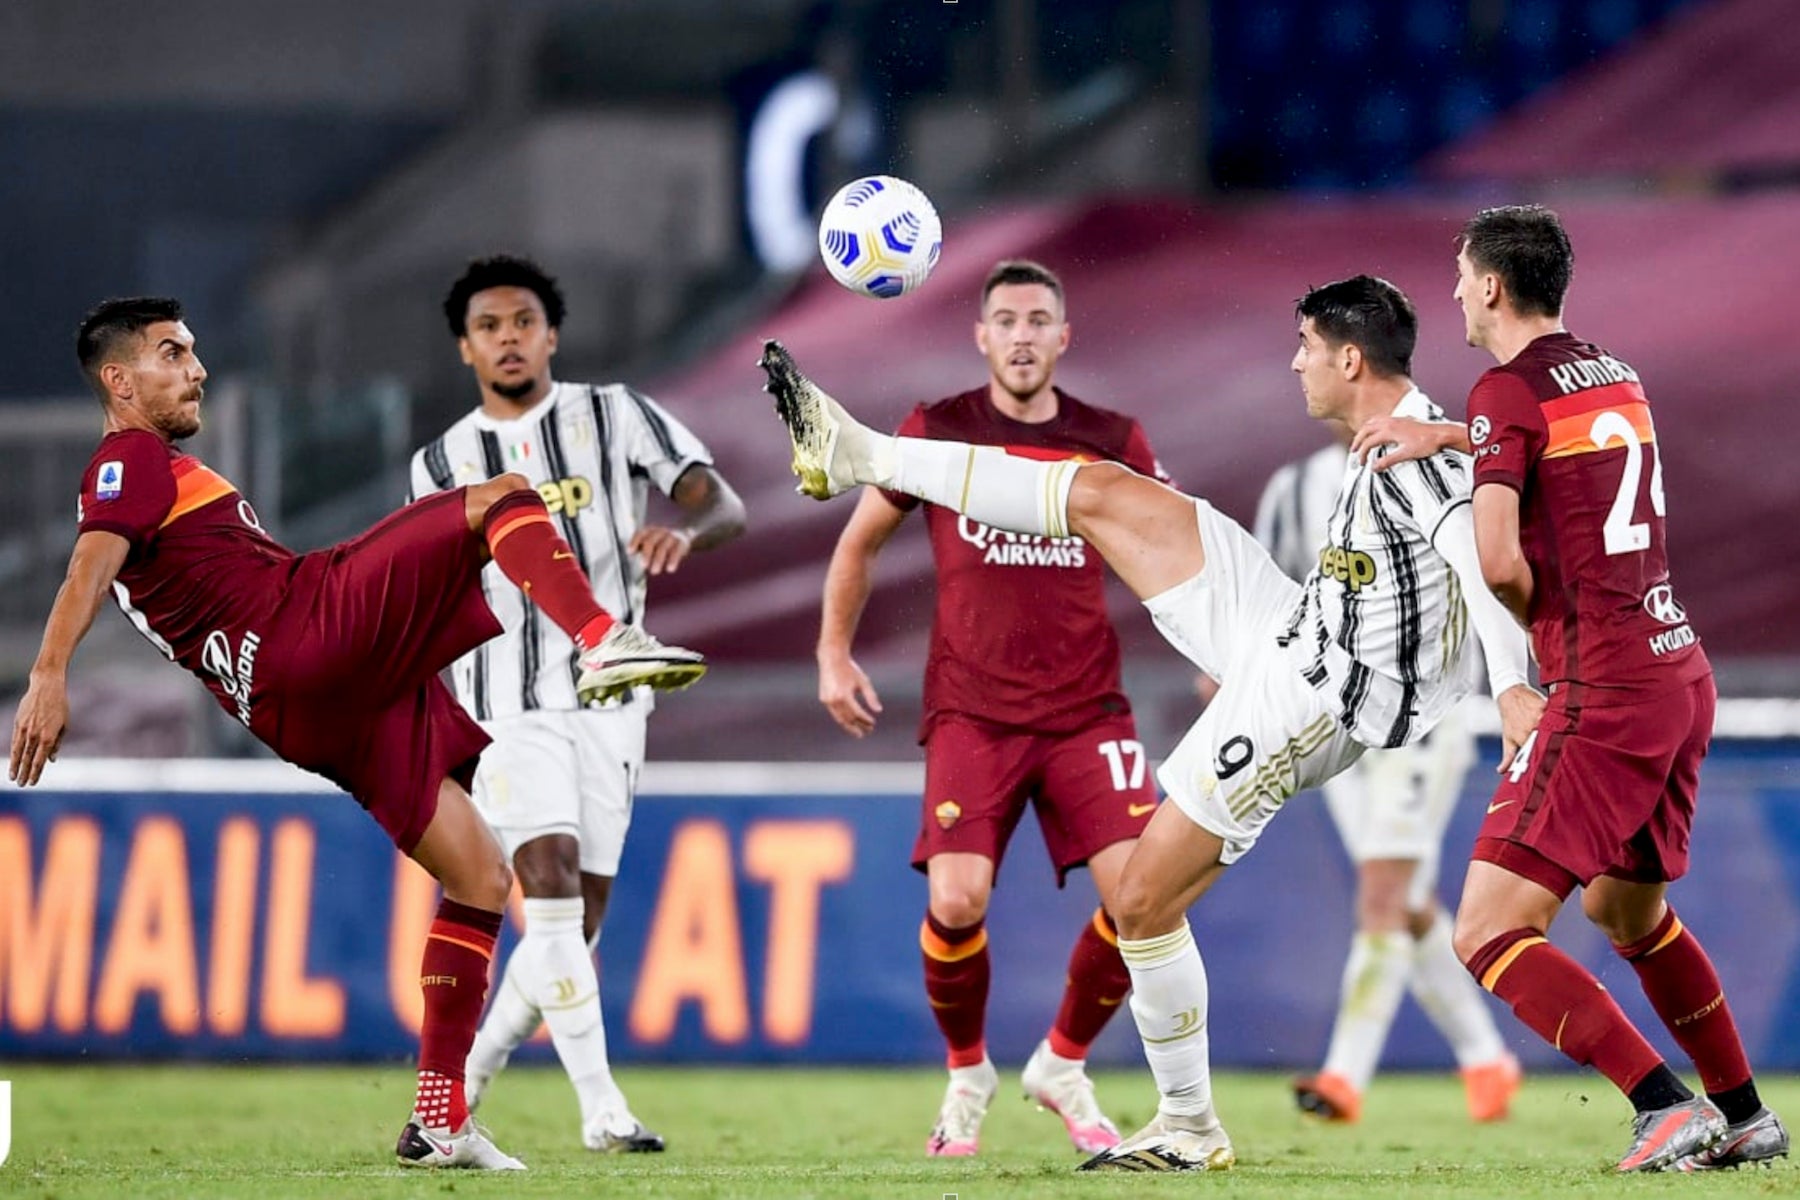 juventus game football players battling for ball red and white uniforms